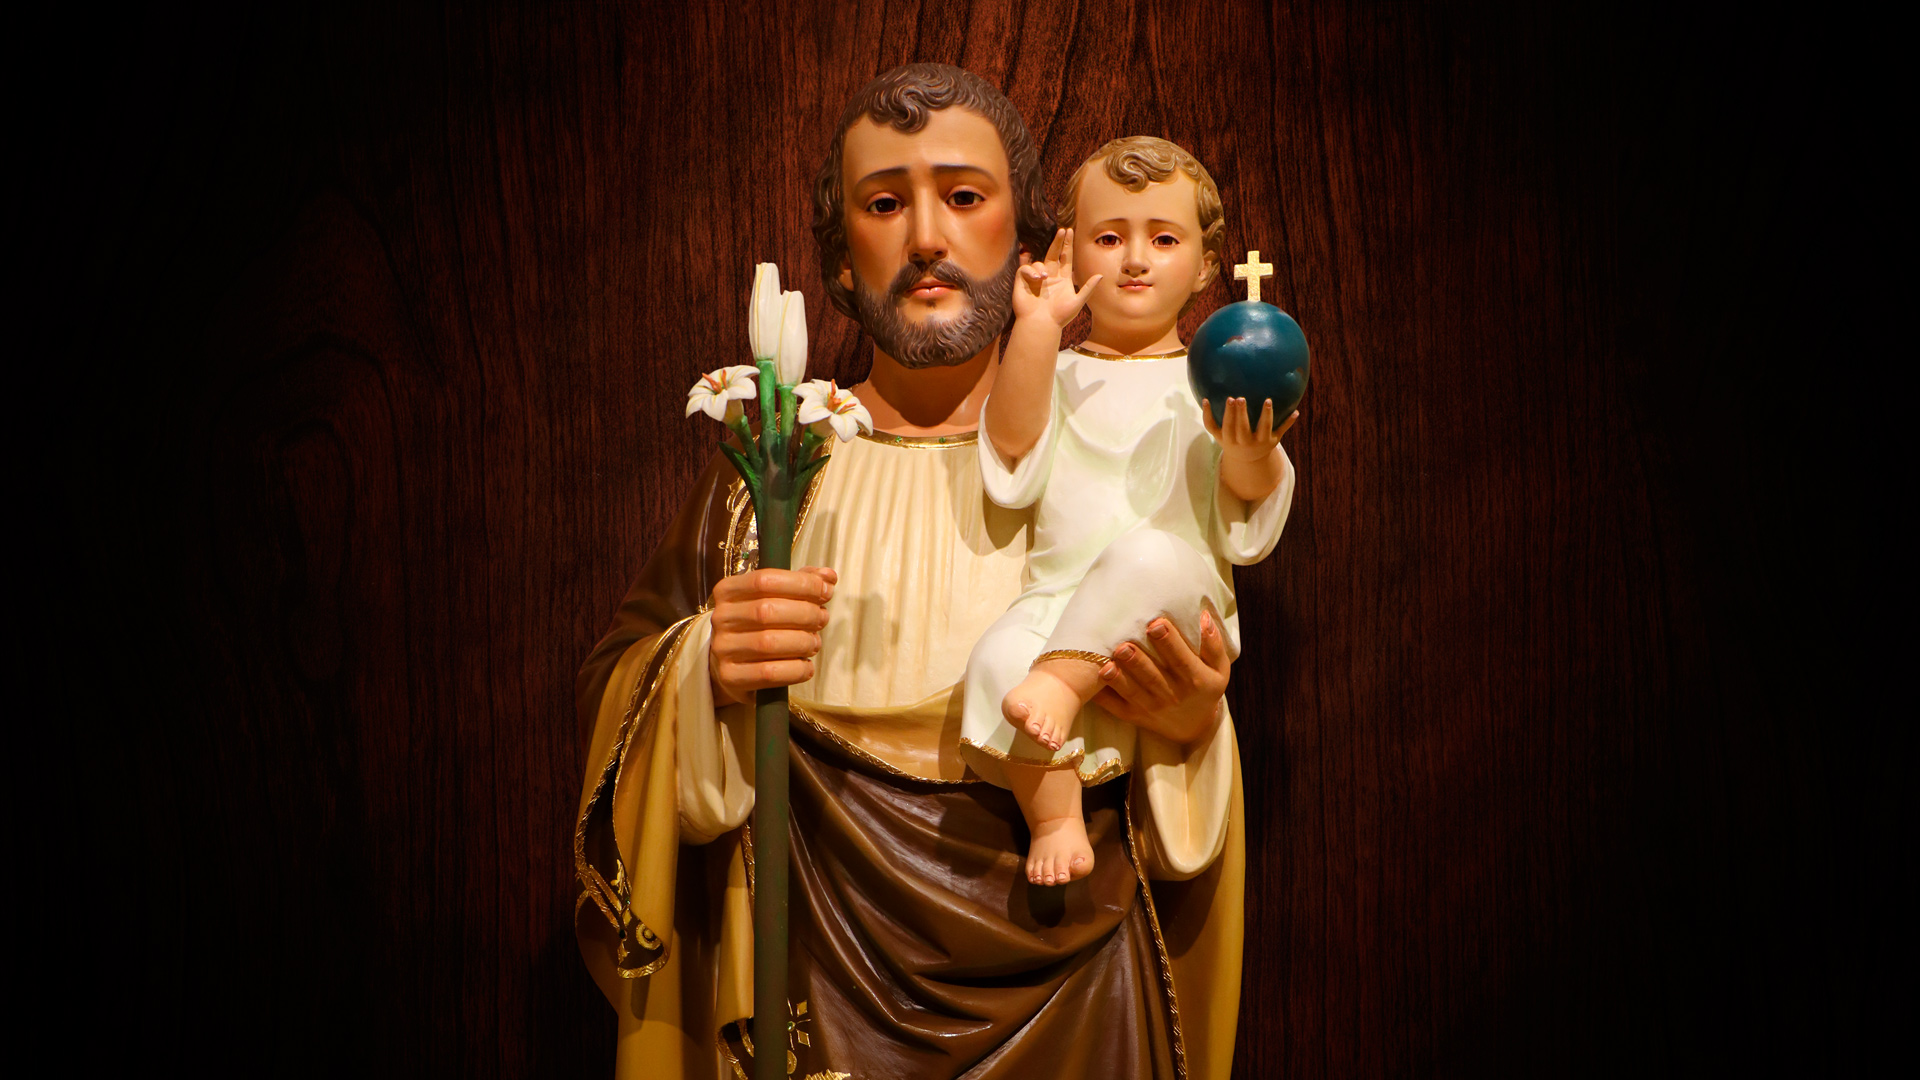 Hd Images Of Joseph With Jesus